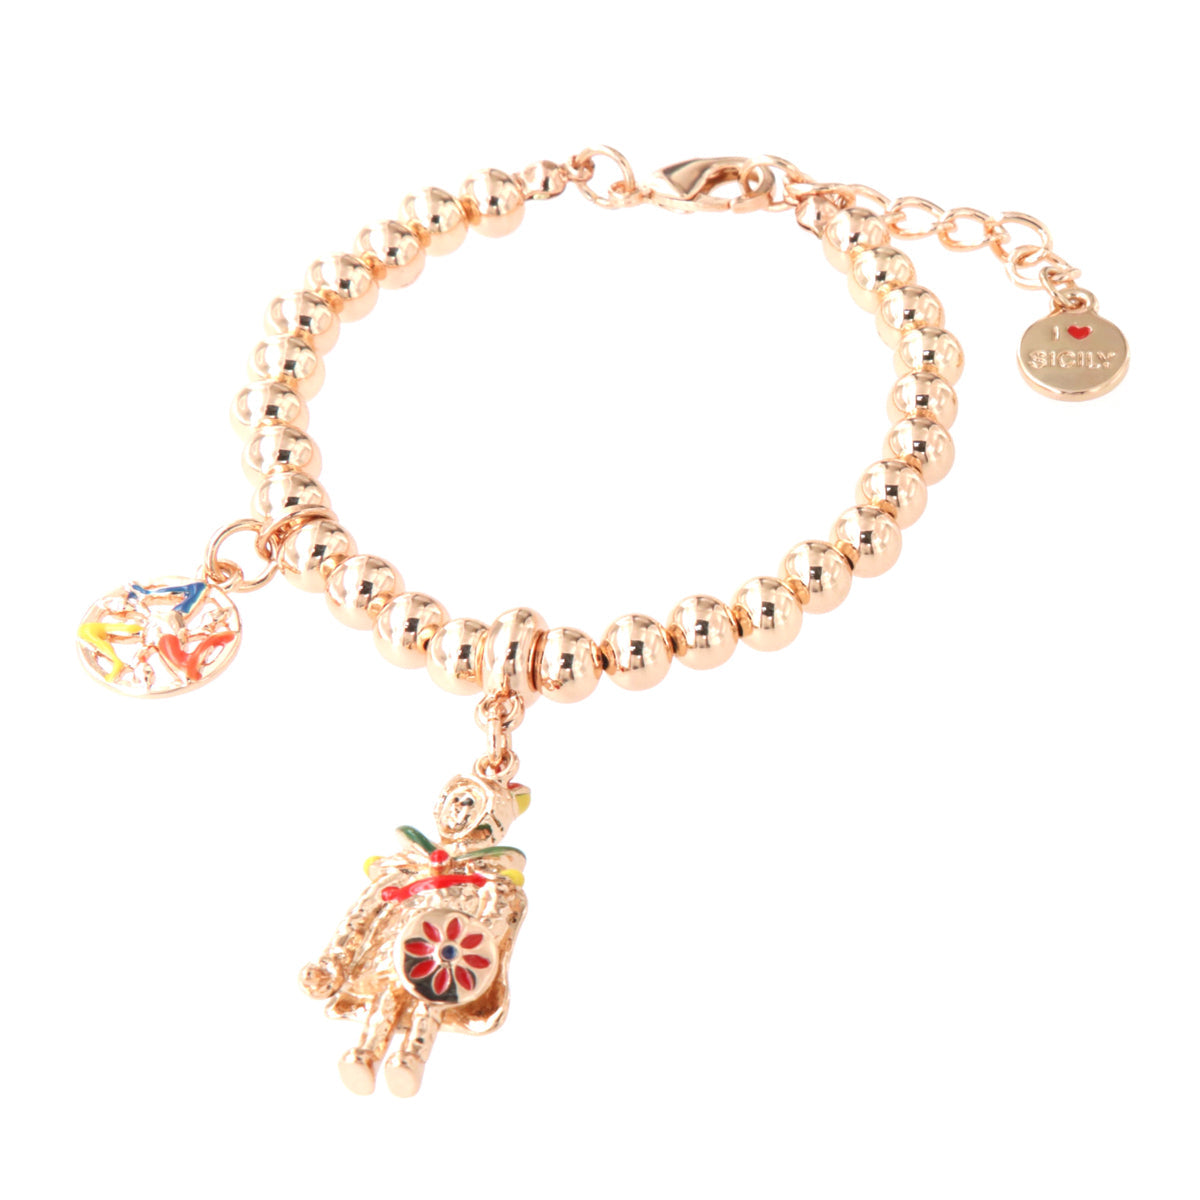 Metal bracelet spheres shirt, with pendant Sicilian puppet, embellished with colored glazes